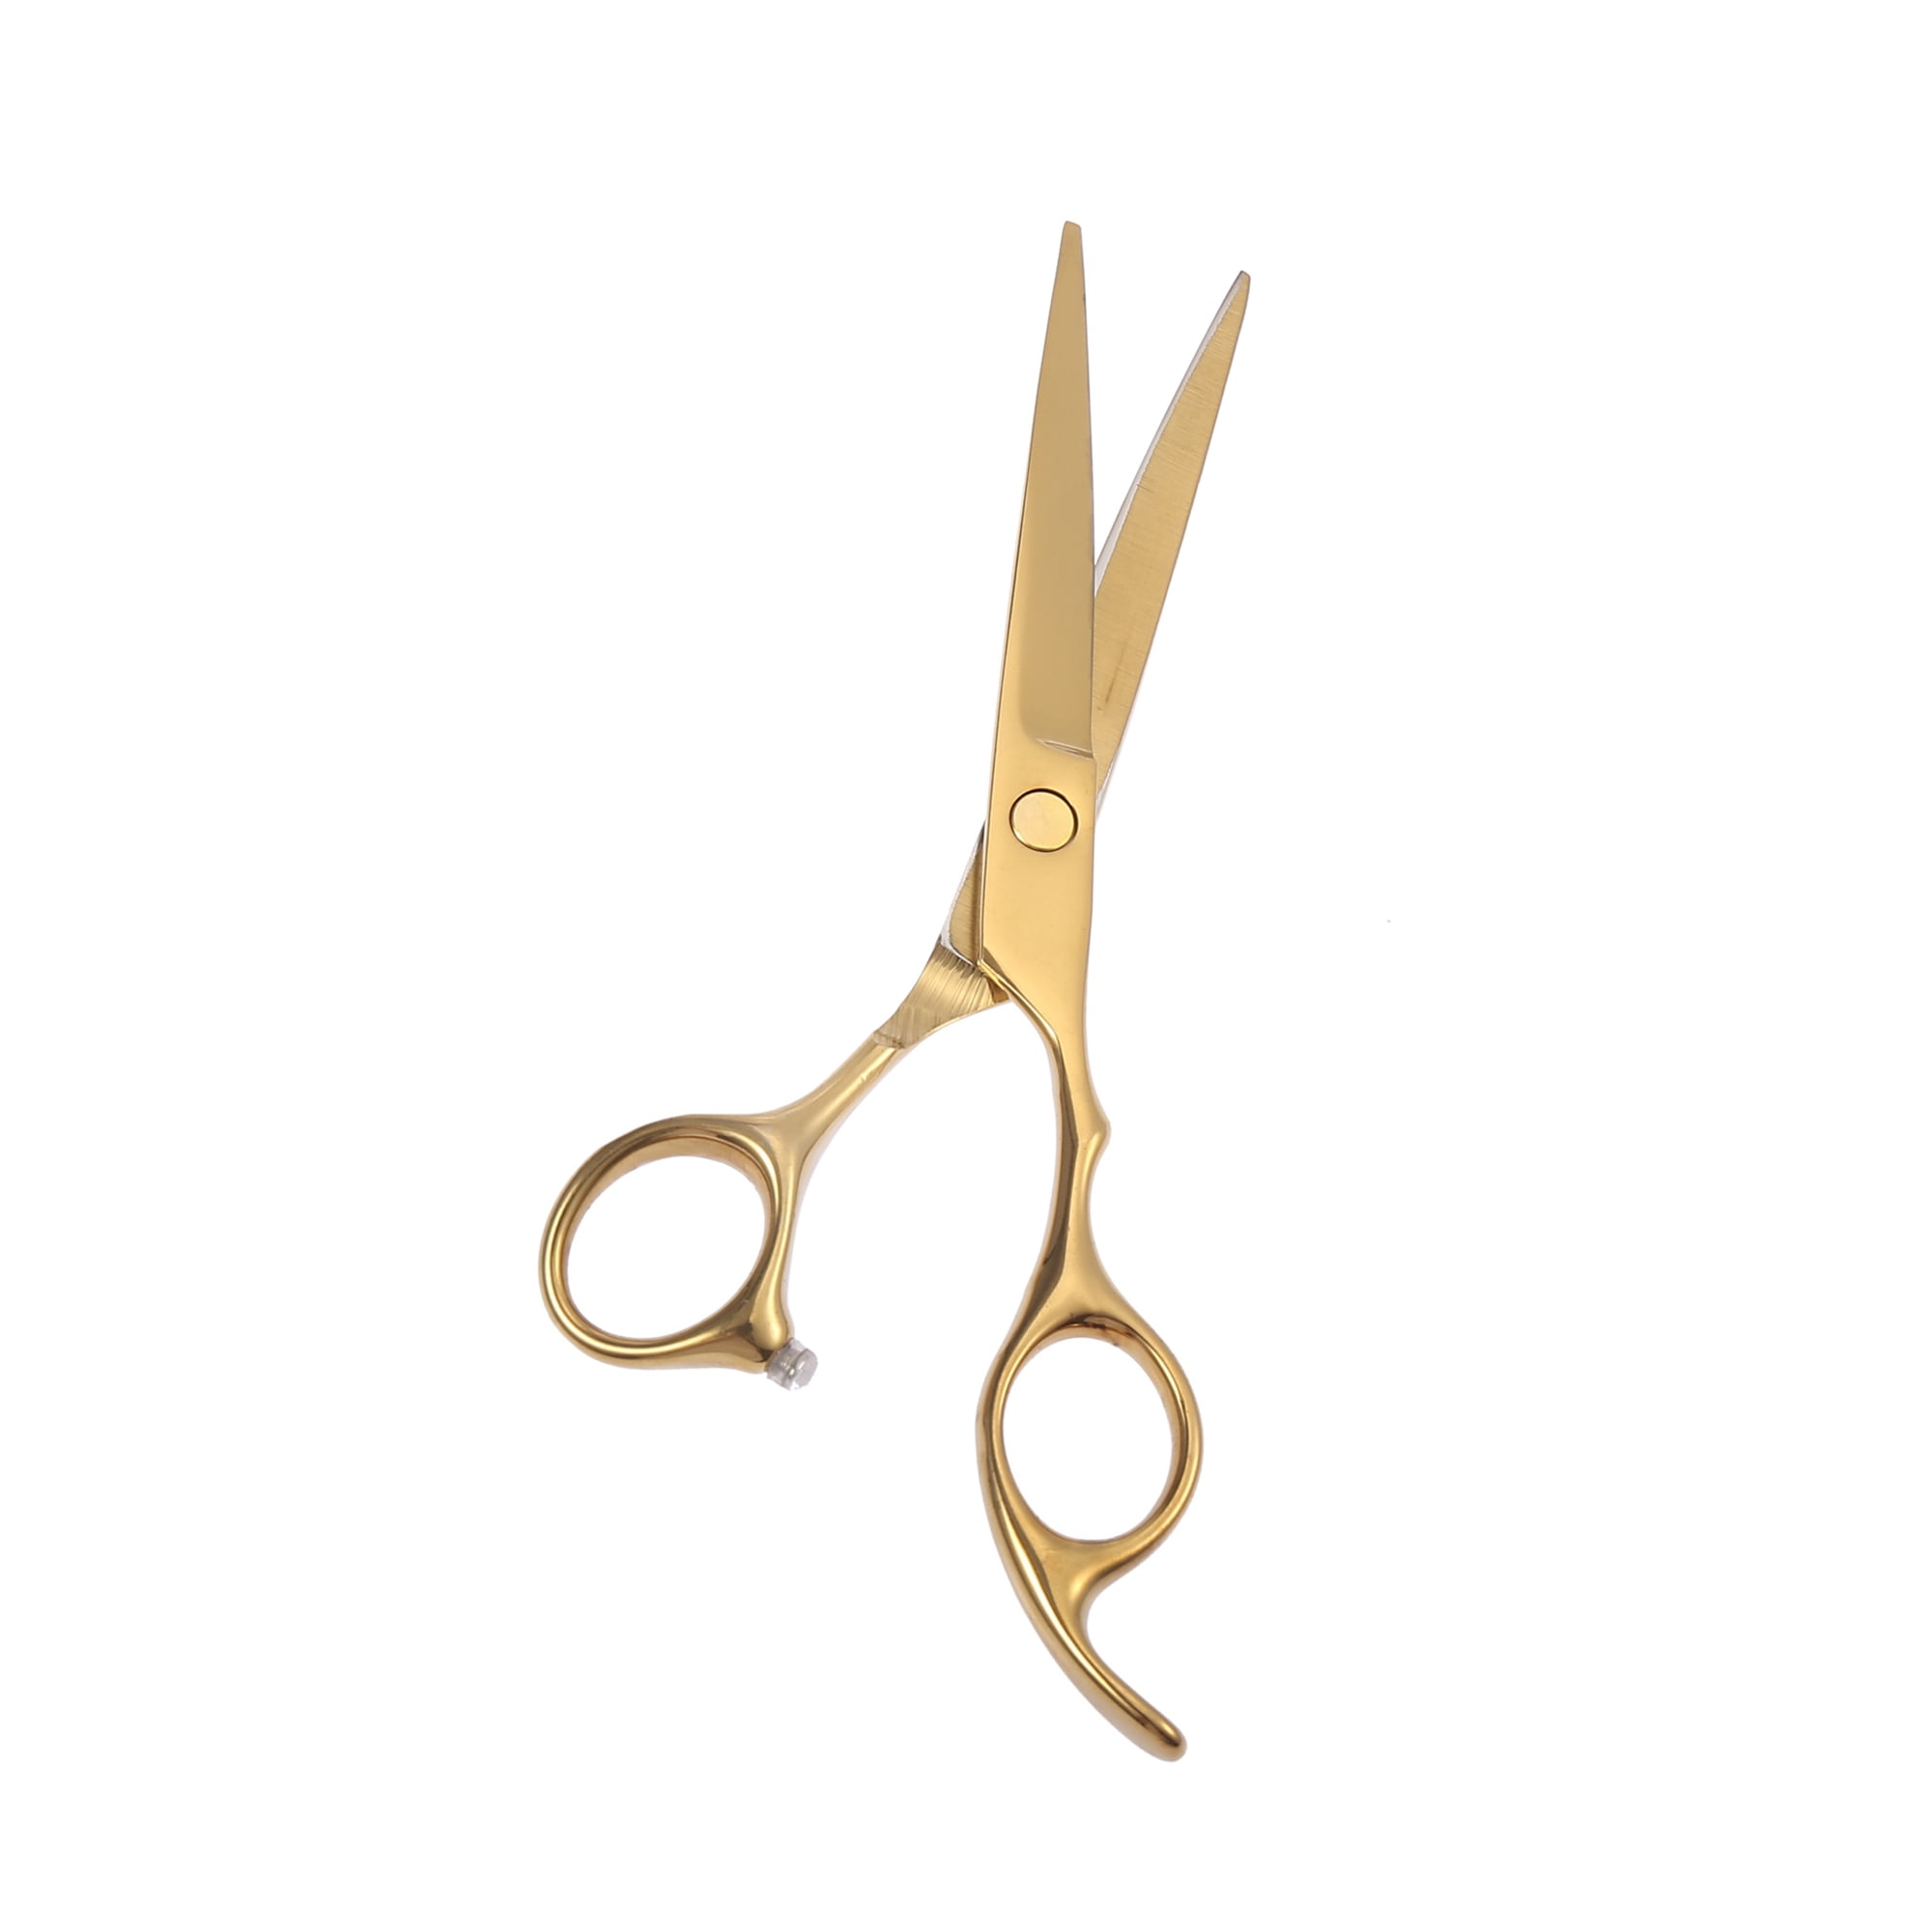 Famore Straight Trimming Scissors - 6in